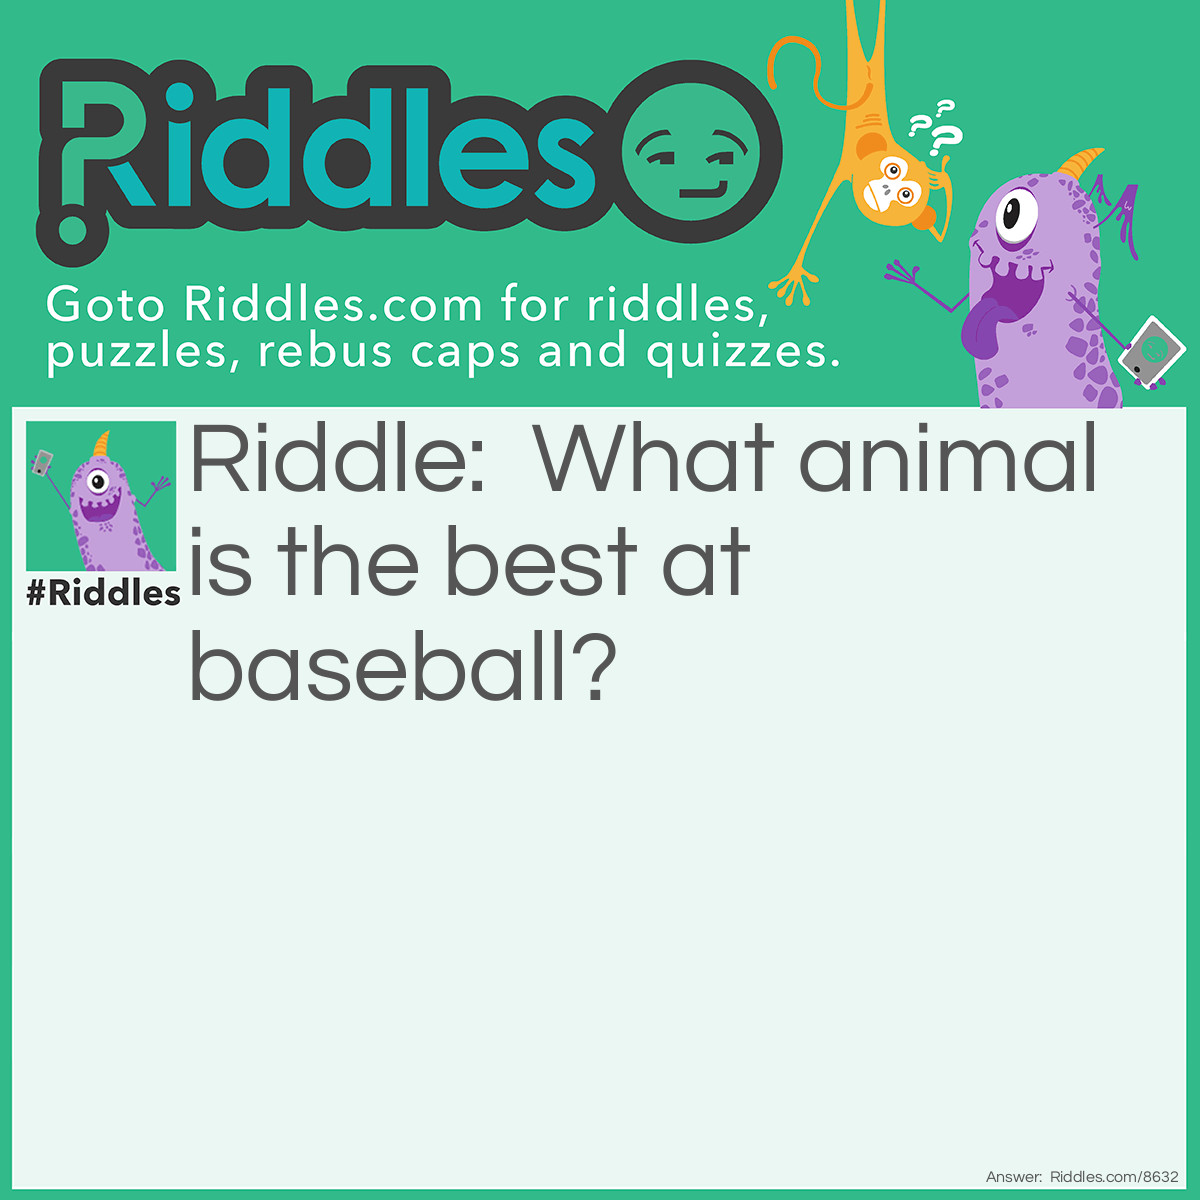 Riddle: What animal is the best at baseball? Answer: A bat.